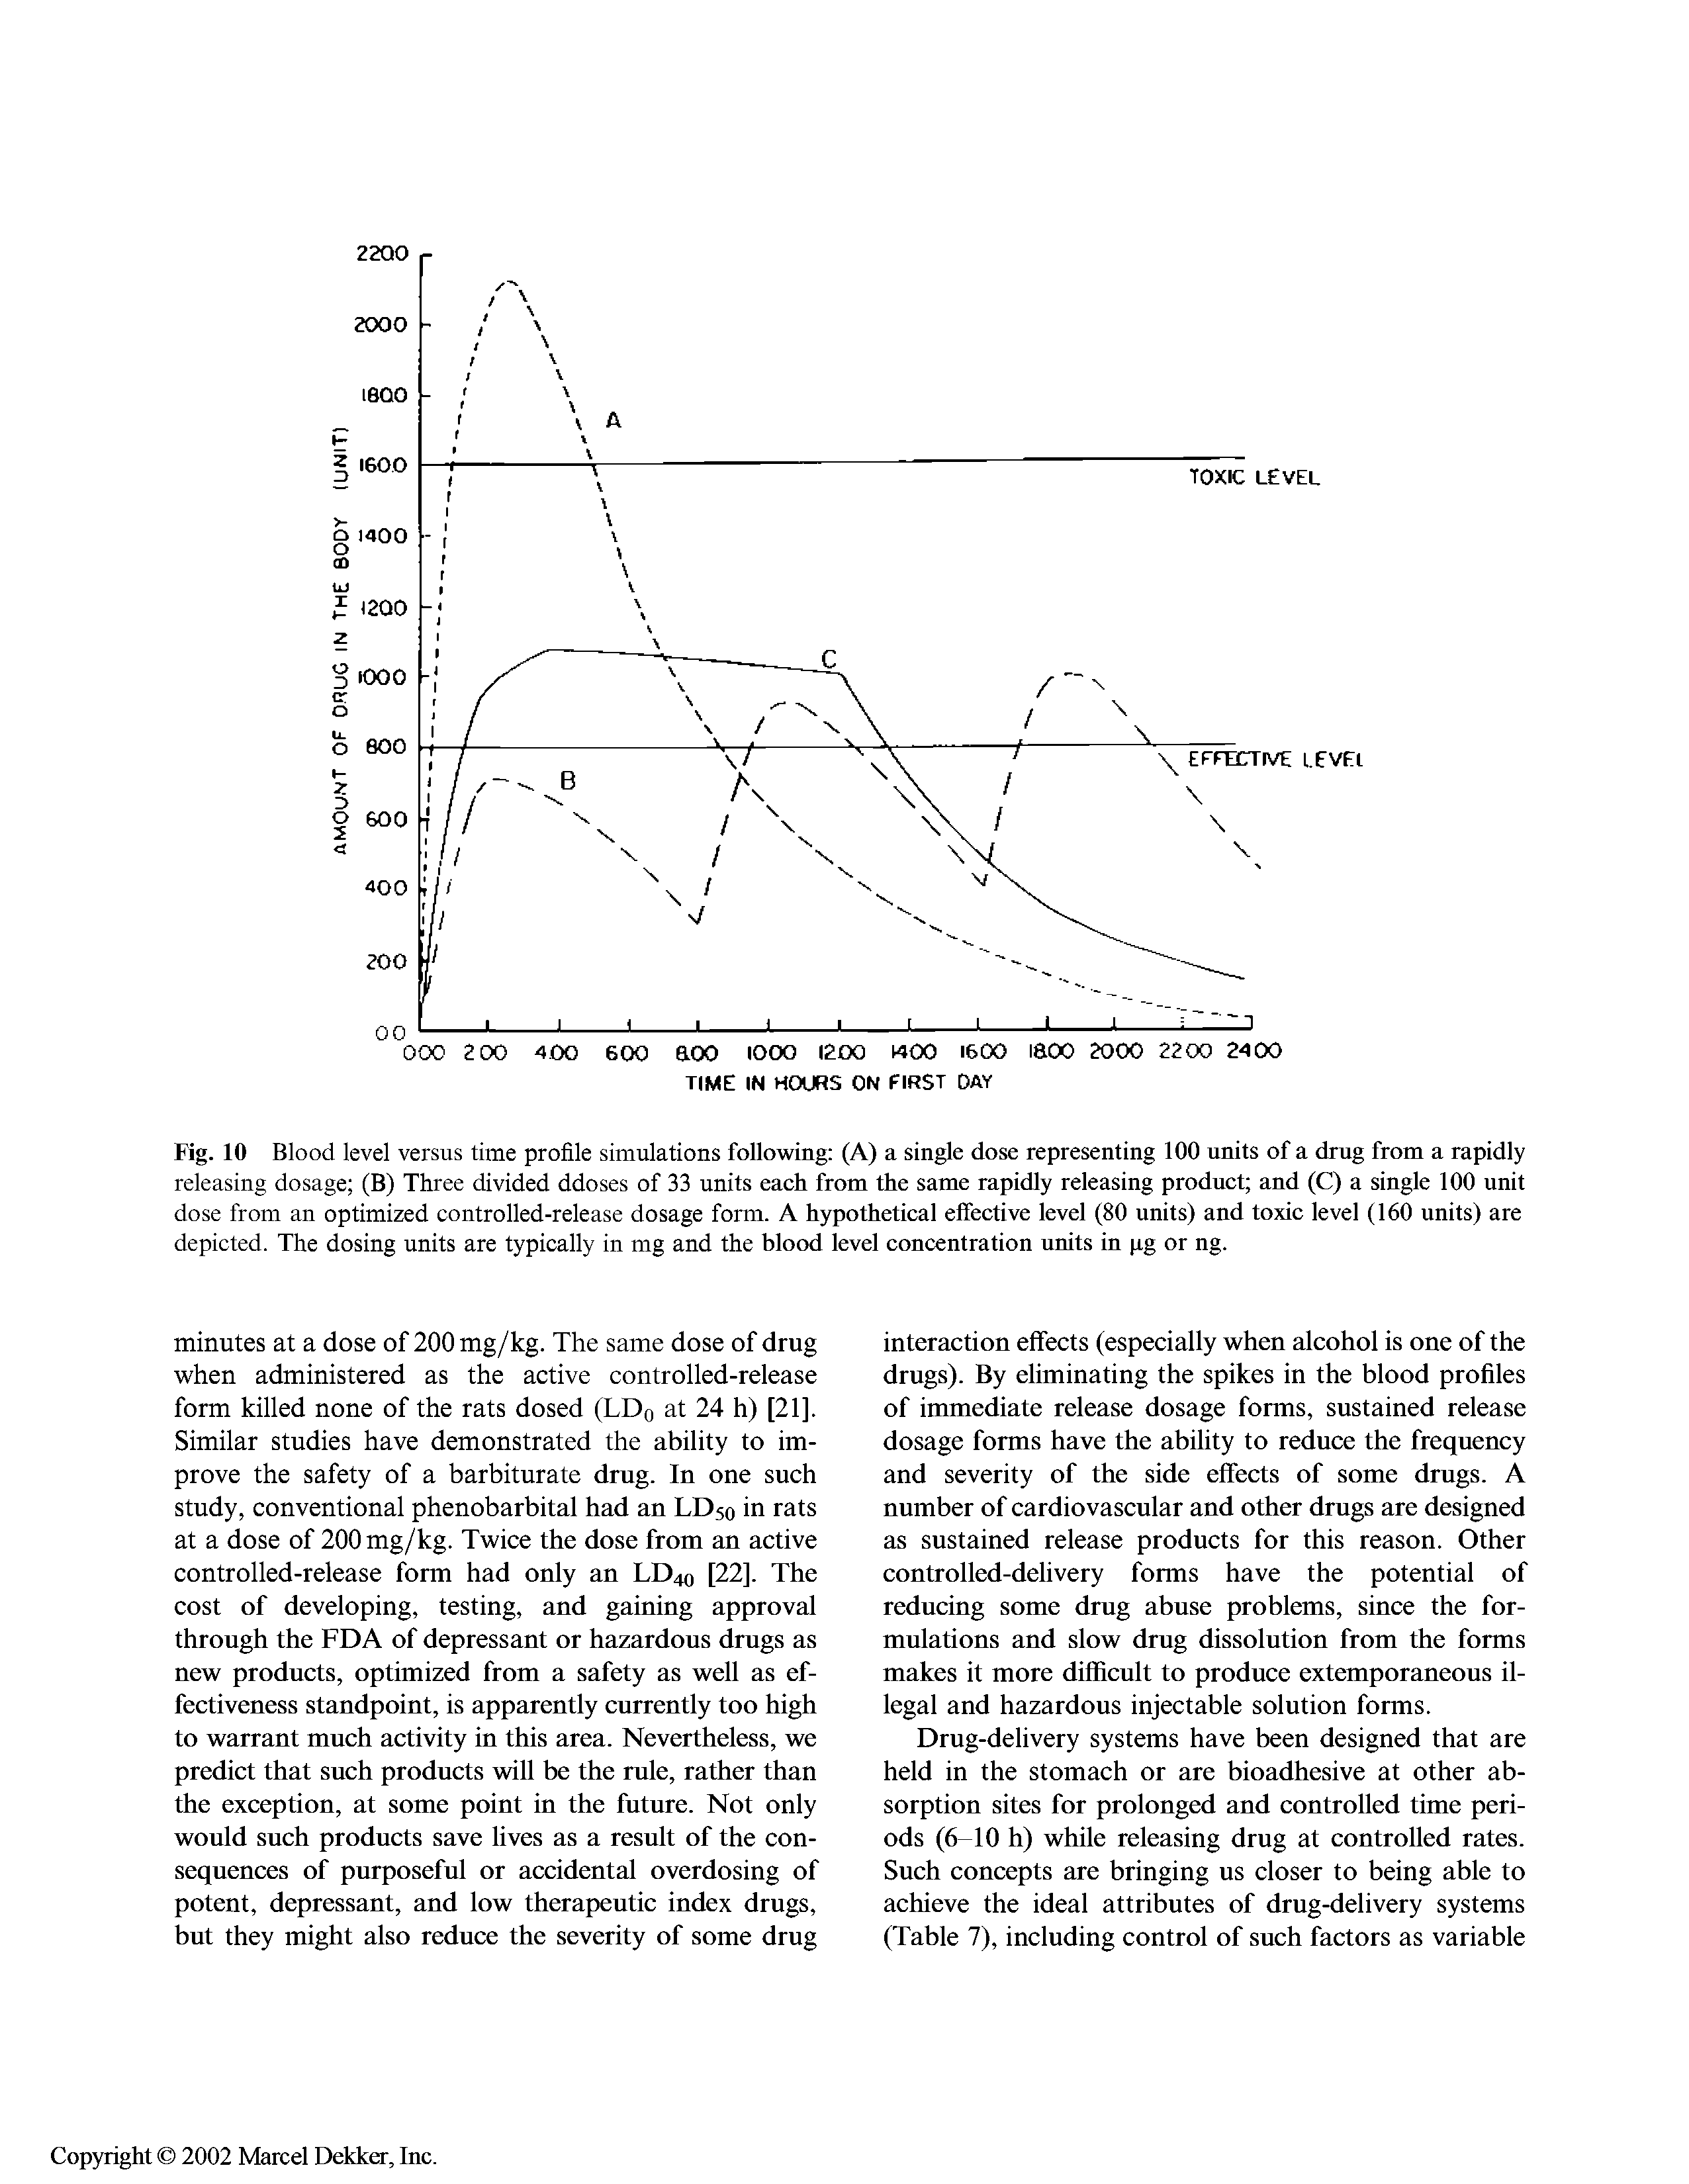 Fig. 10 Blood level versus time profile simulations following (A) a single dose representing 100 units of a drug from a rapidly releasing dosage (B) Three divided ddoses of 33 units each from the same rapidly releasing product and (C) a single 100 unit dose from an optimized controlled-release dosage form. A hypothetical effective level (80 units) and toxic level (160 units) are depicted. The dosing units are typically in mg and the blood level concentration units in pg or ng.